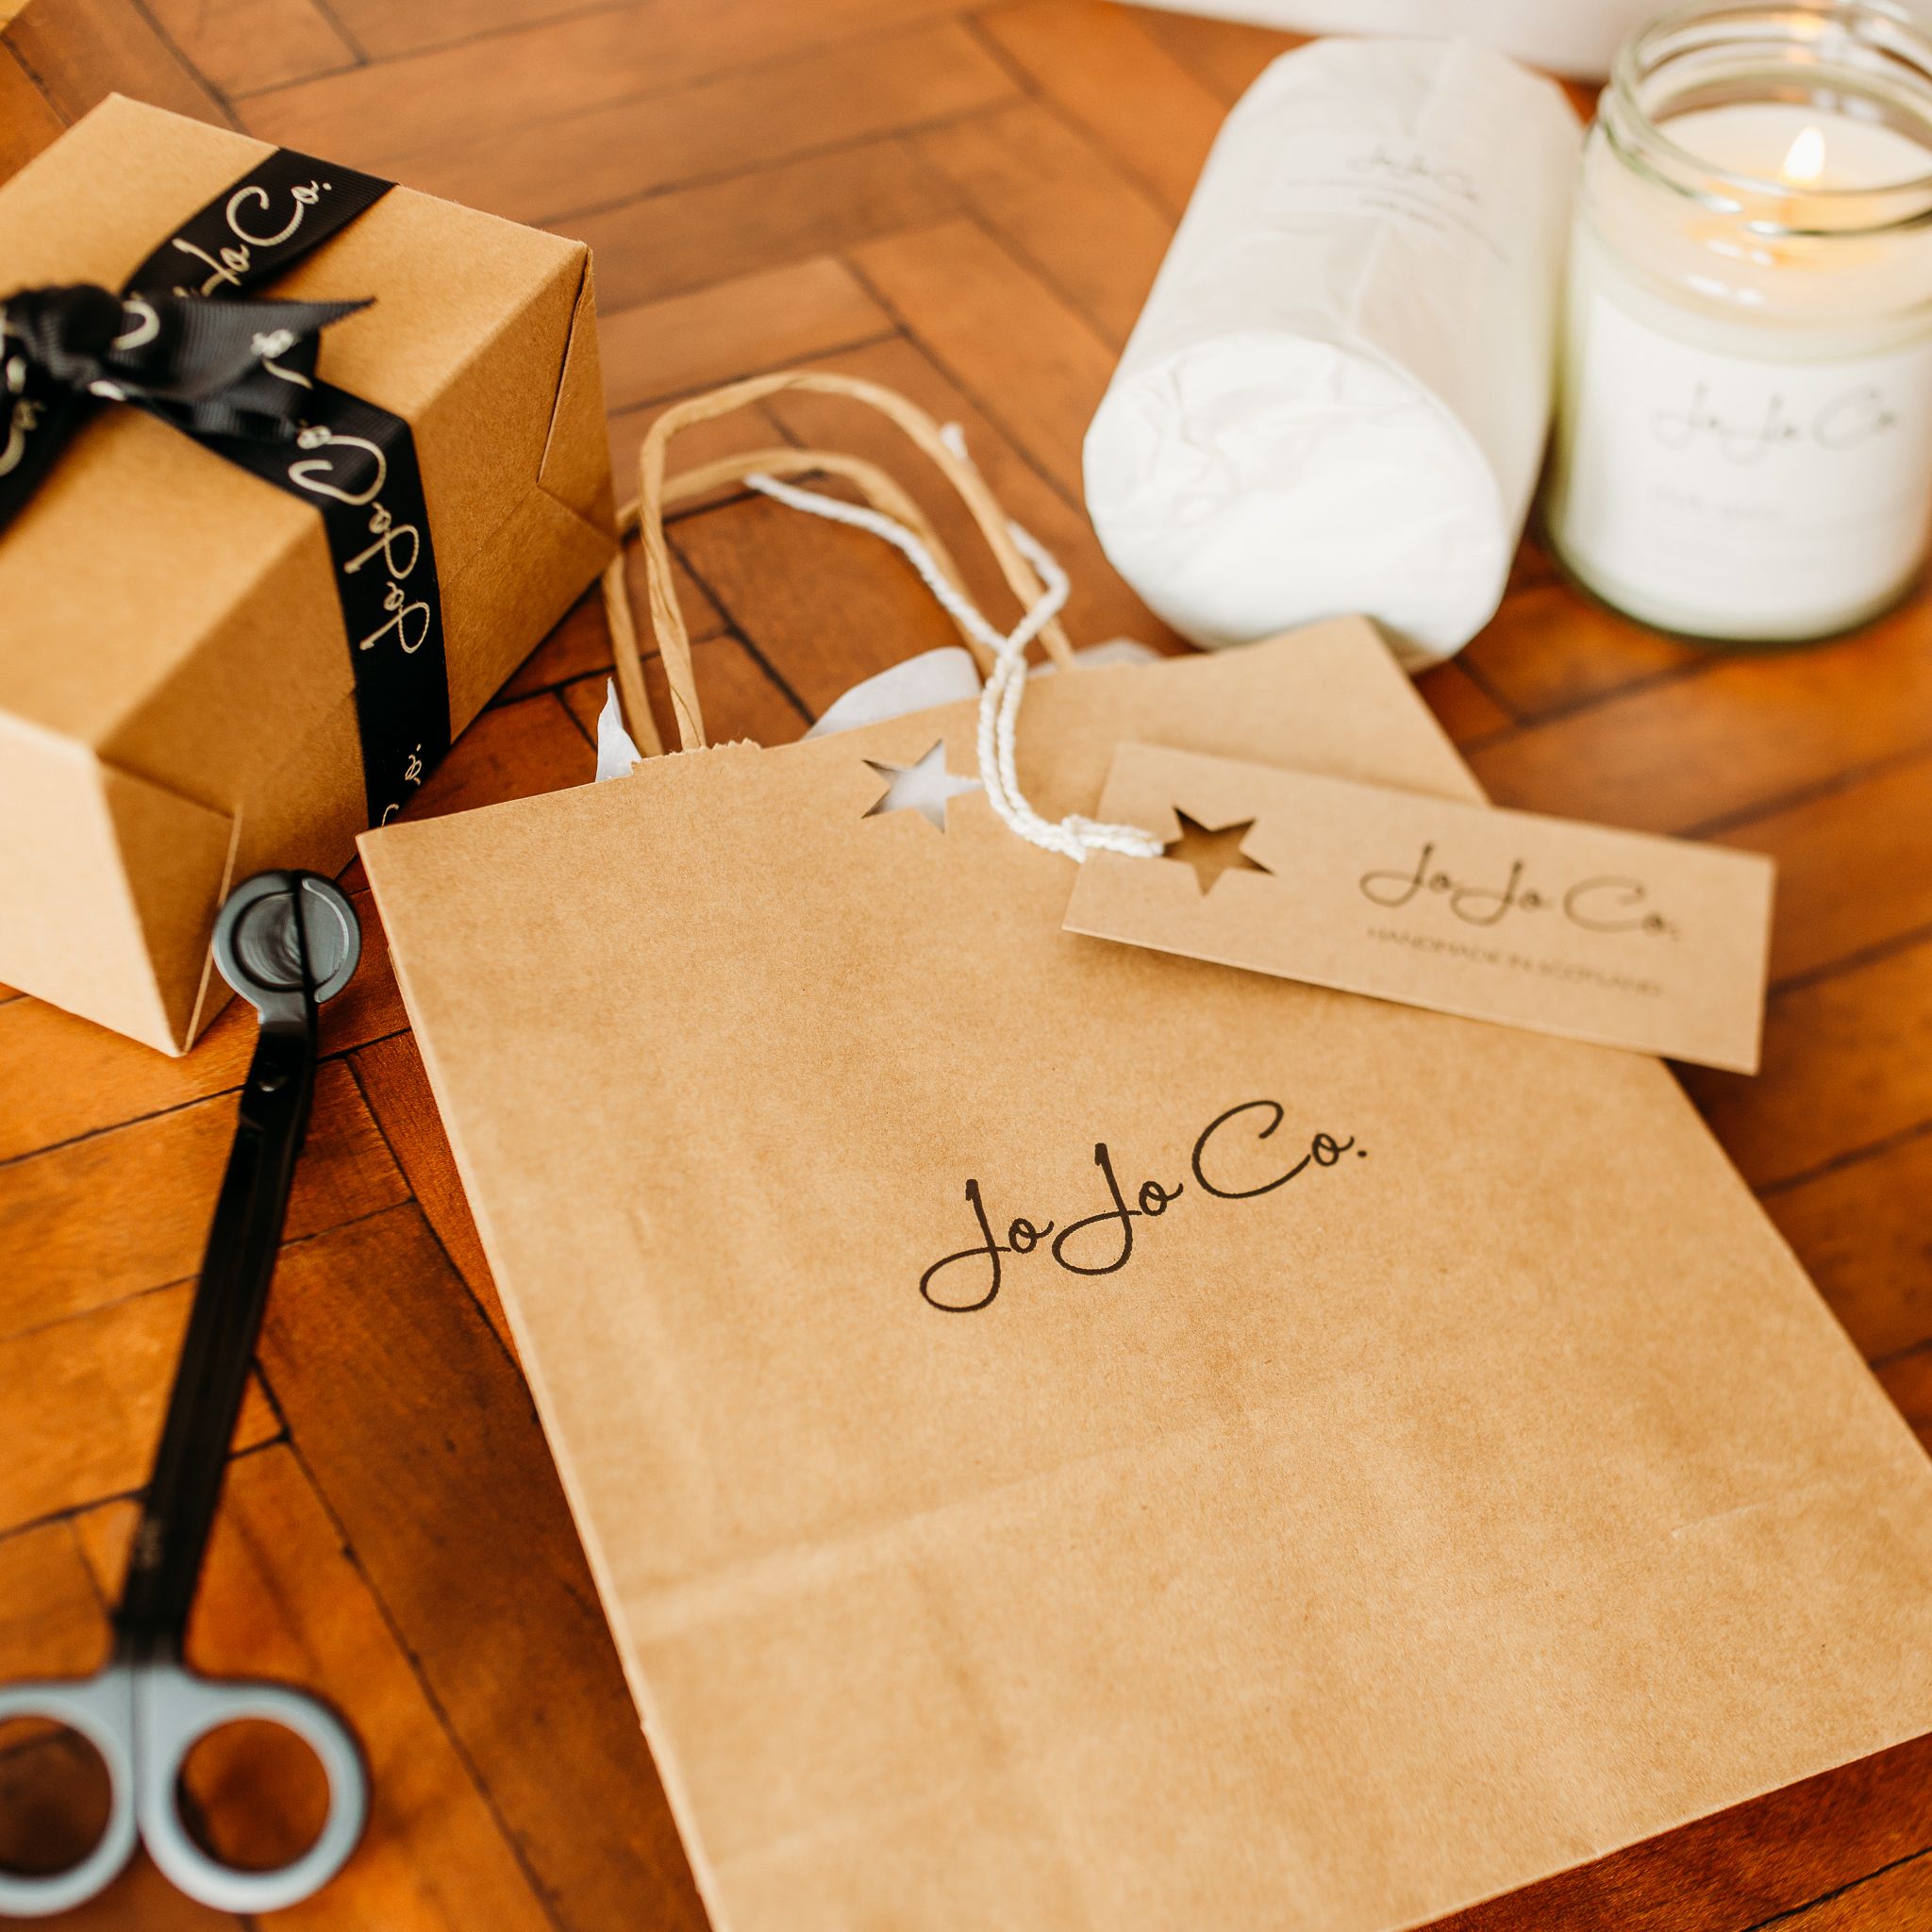 A selection of gift wrapping materials sit on a wooden floor. Gift bags with tags, tissue paper, a gift box with black bow and a pair of scissors. 